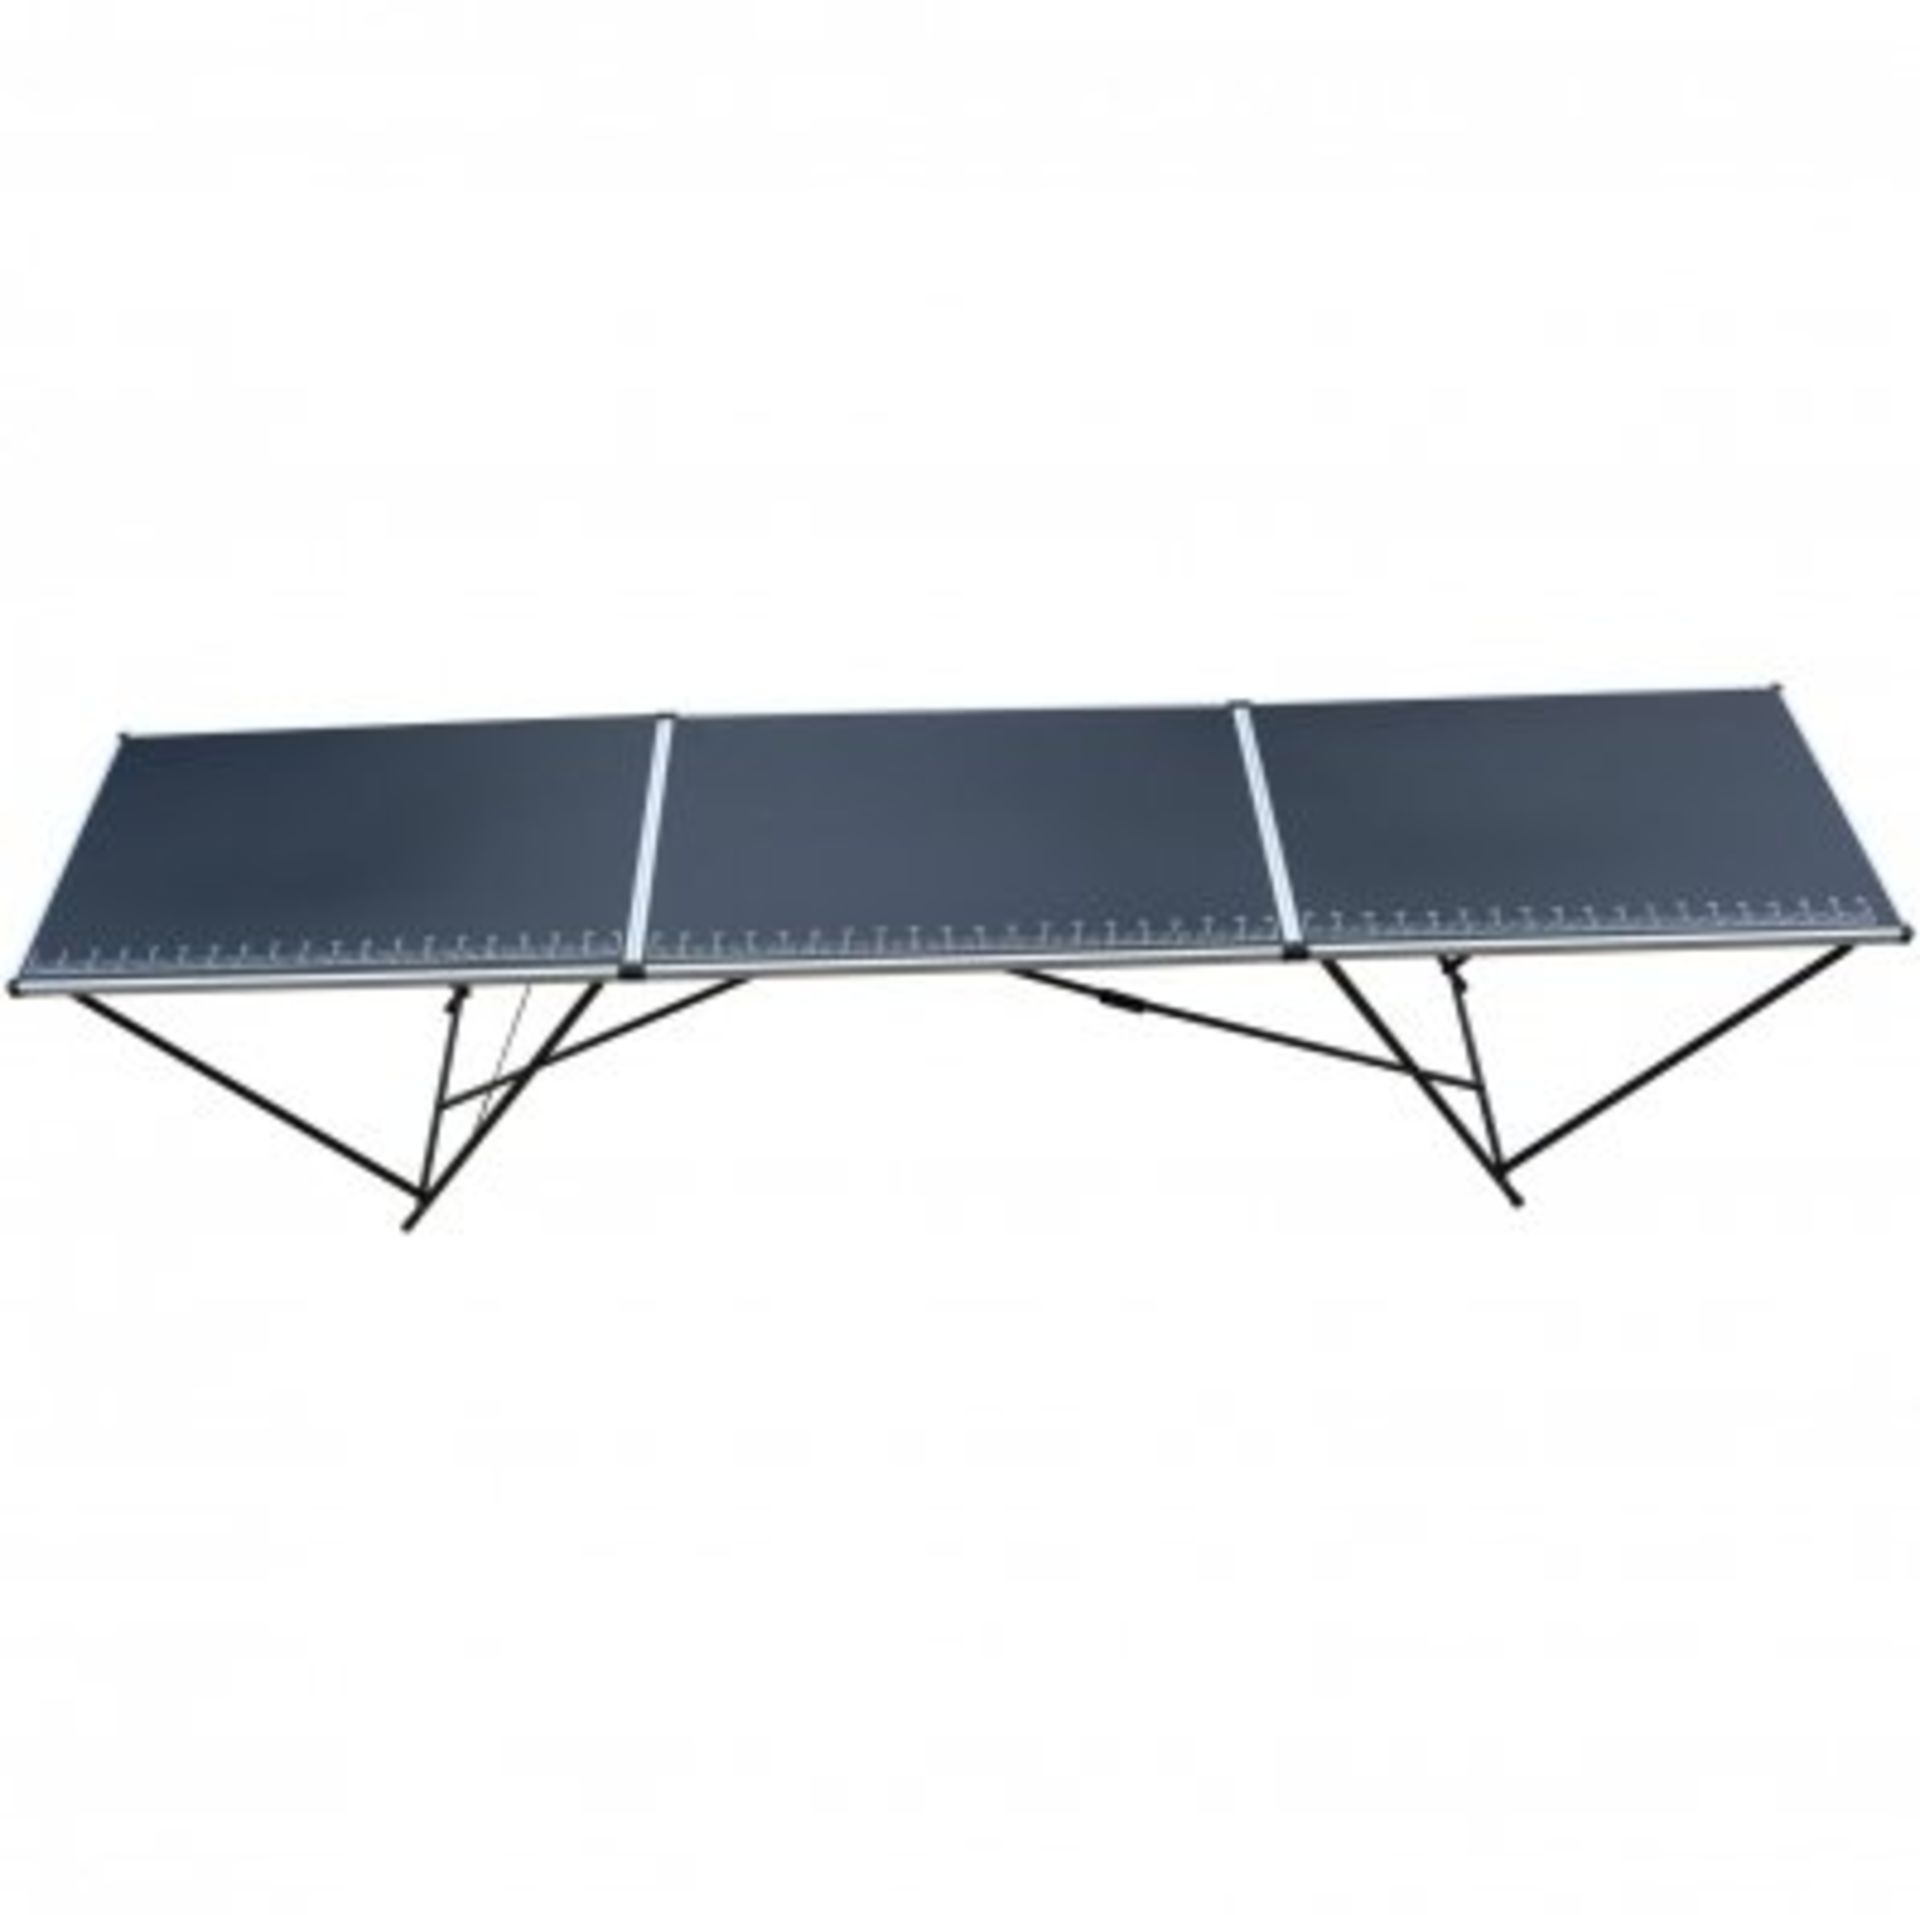 (KK56) 3m Aluminium Folding Wallpaper Pasting Decorating Table The pasting table is ideal fo... - Image 2 of 2